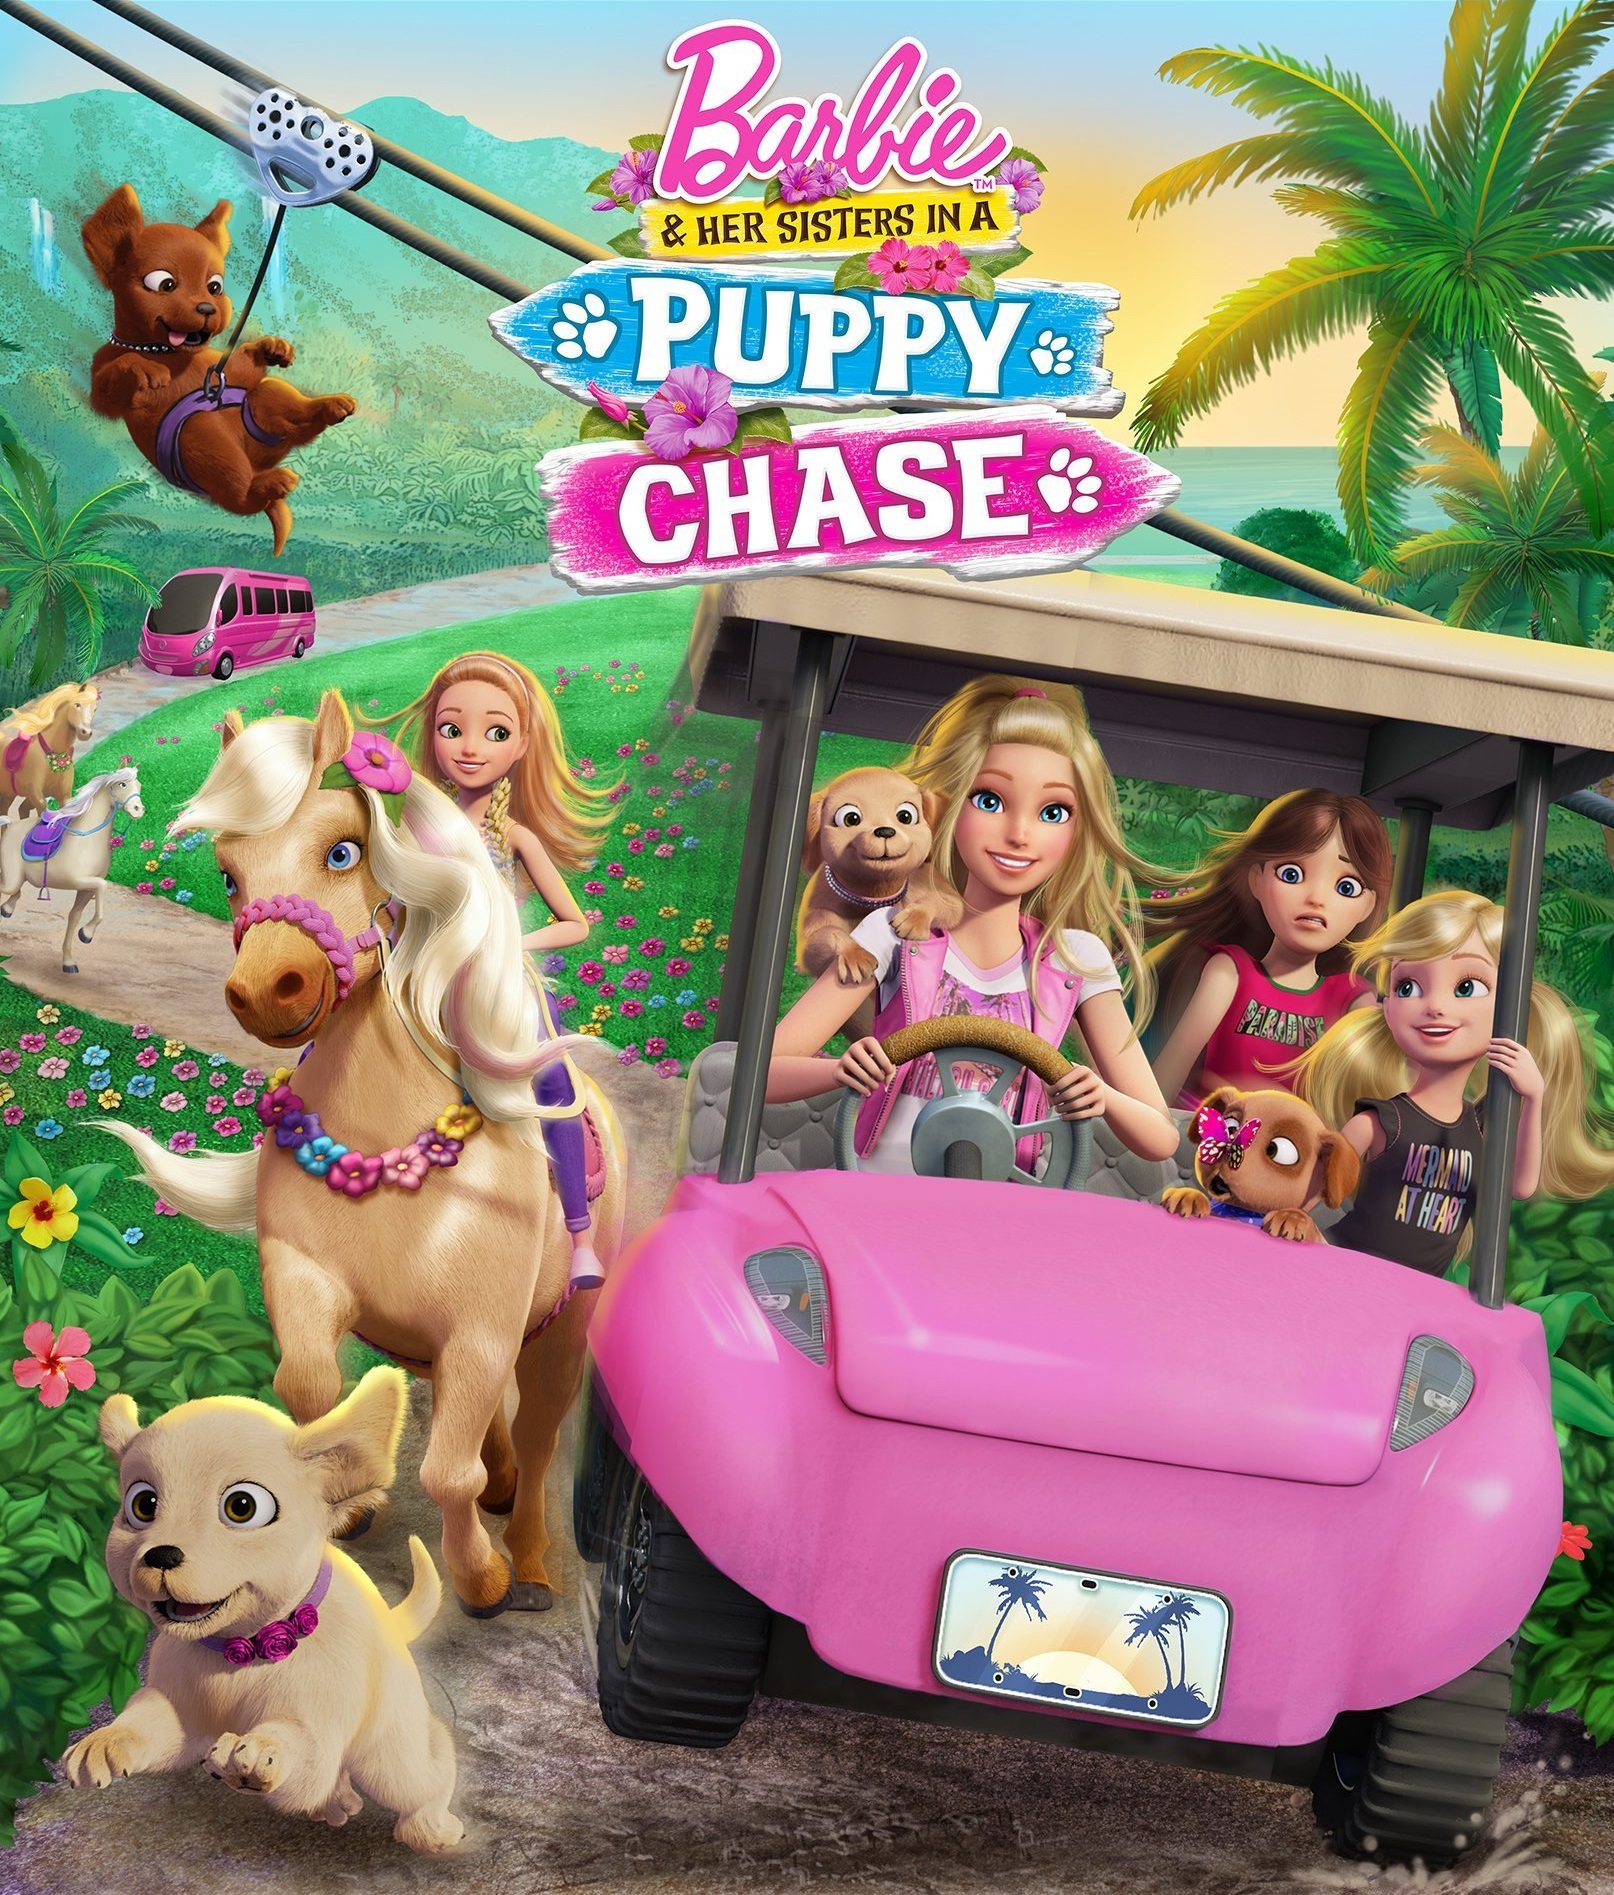 barbie-and-her-sisters-in-a-puppy-chase-2016